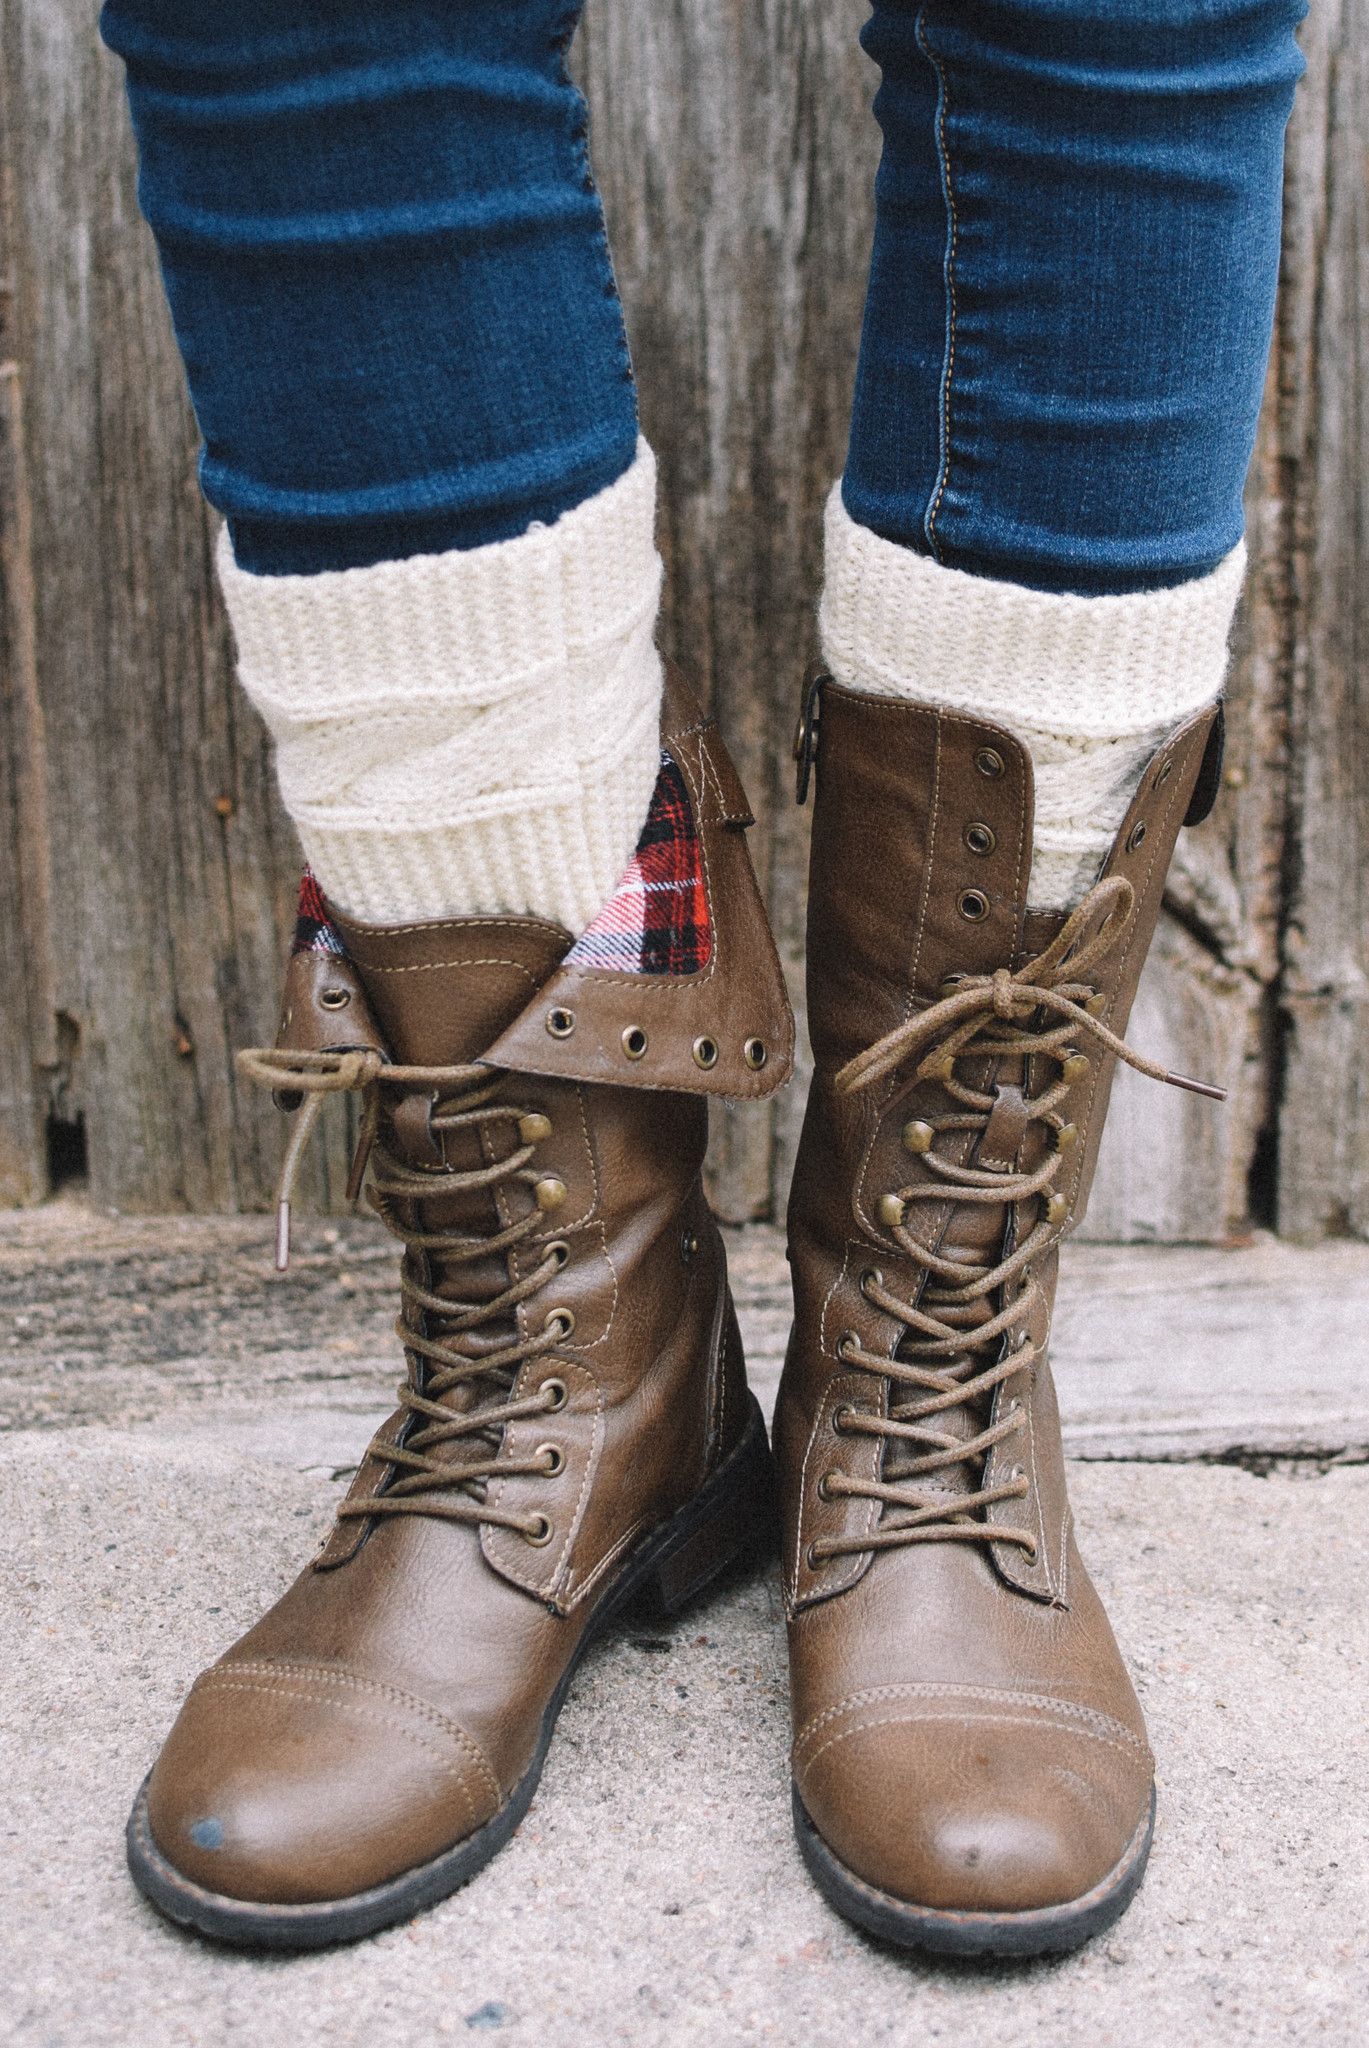 Crested Butte Cream Cable Ribbed Knit Boot Cuffs – bootcuffsocks.com